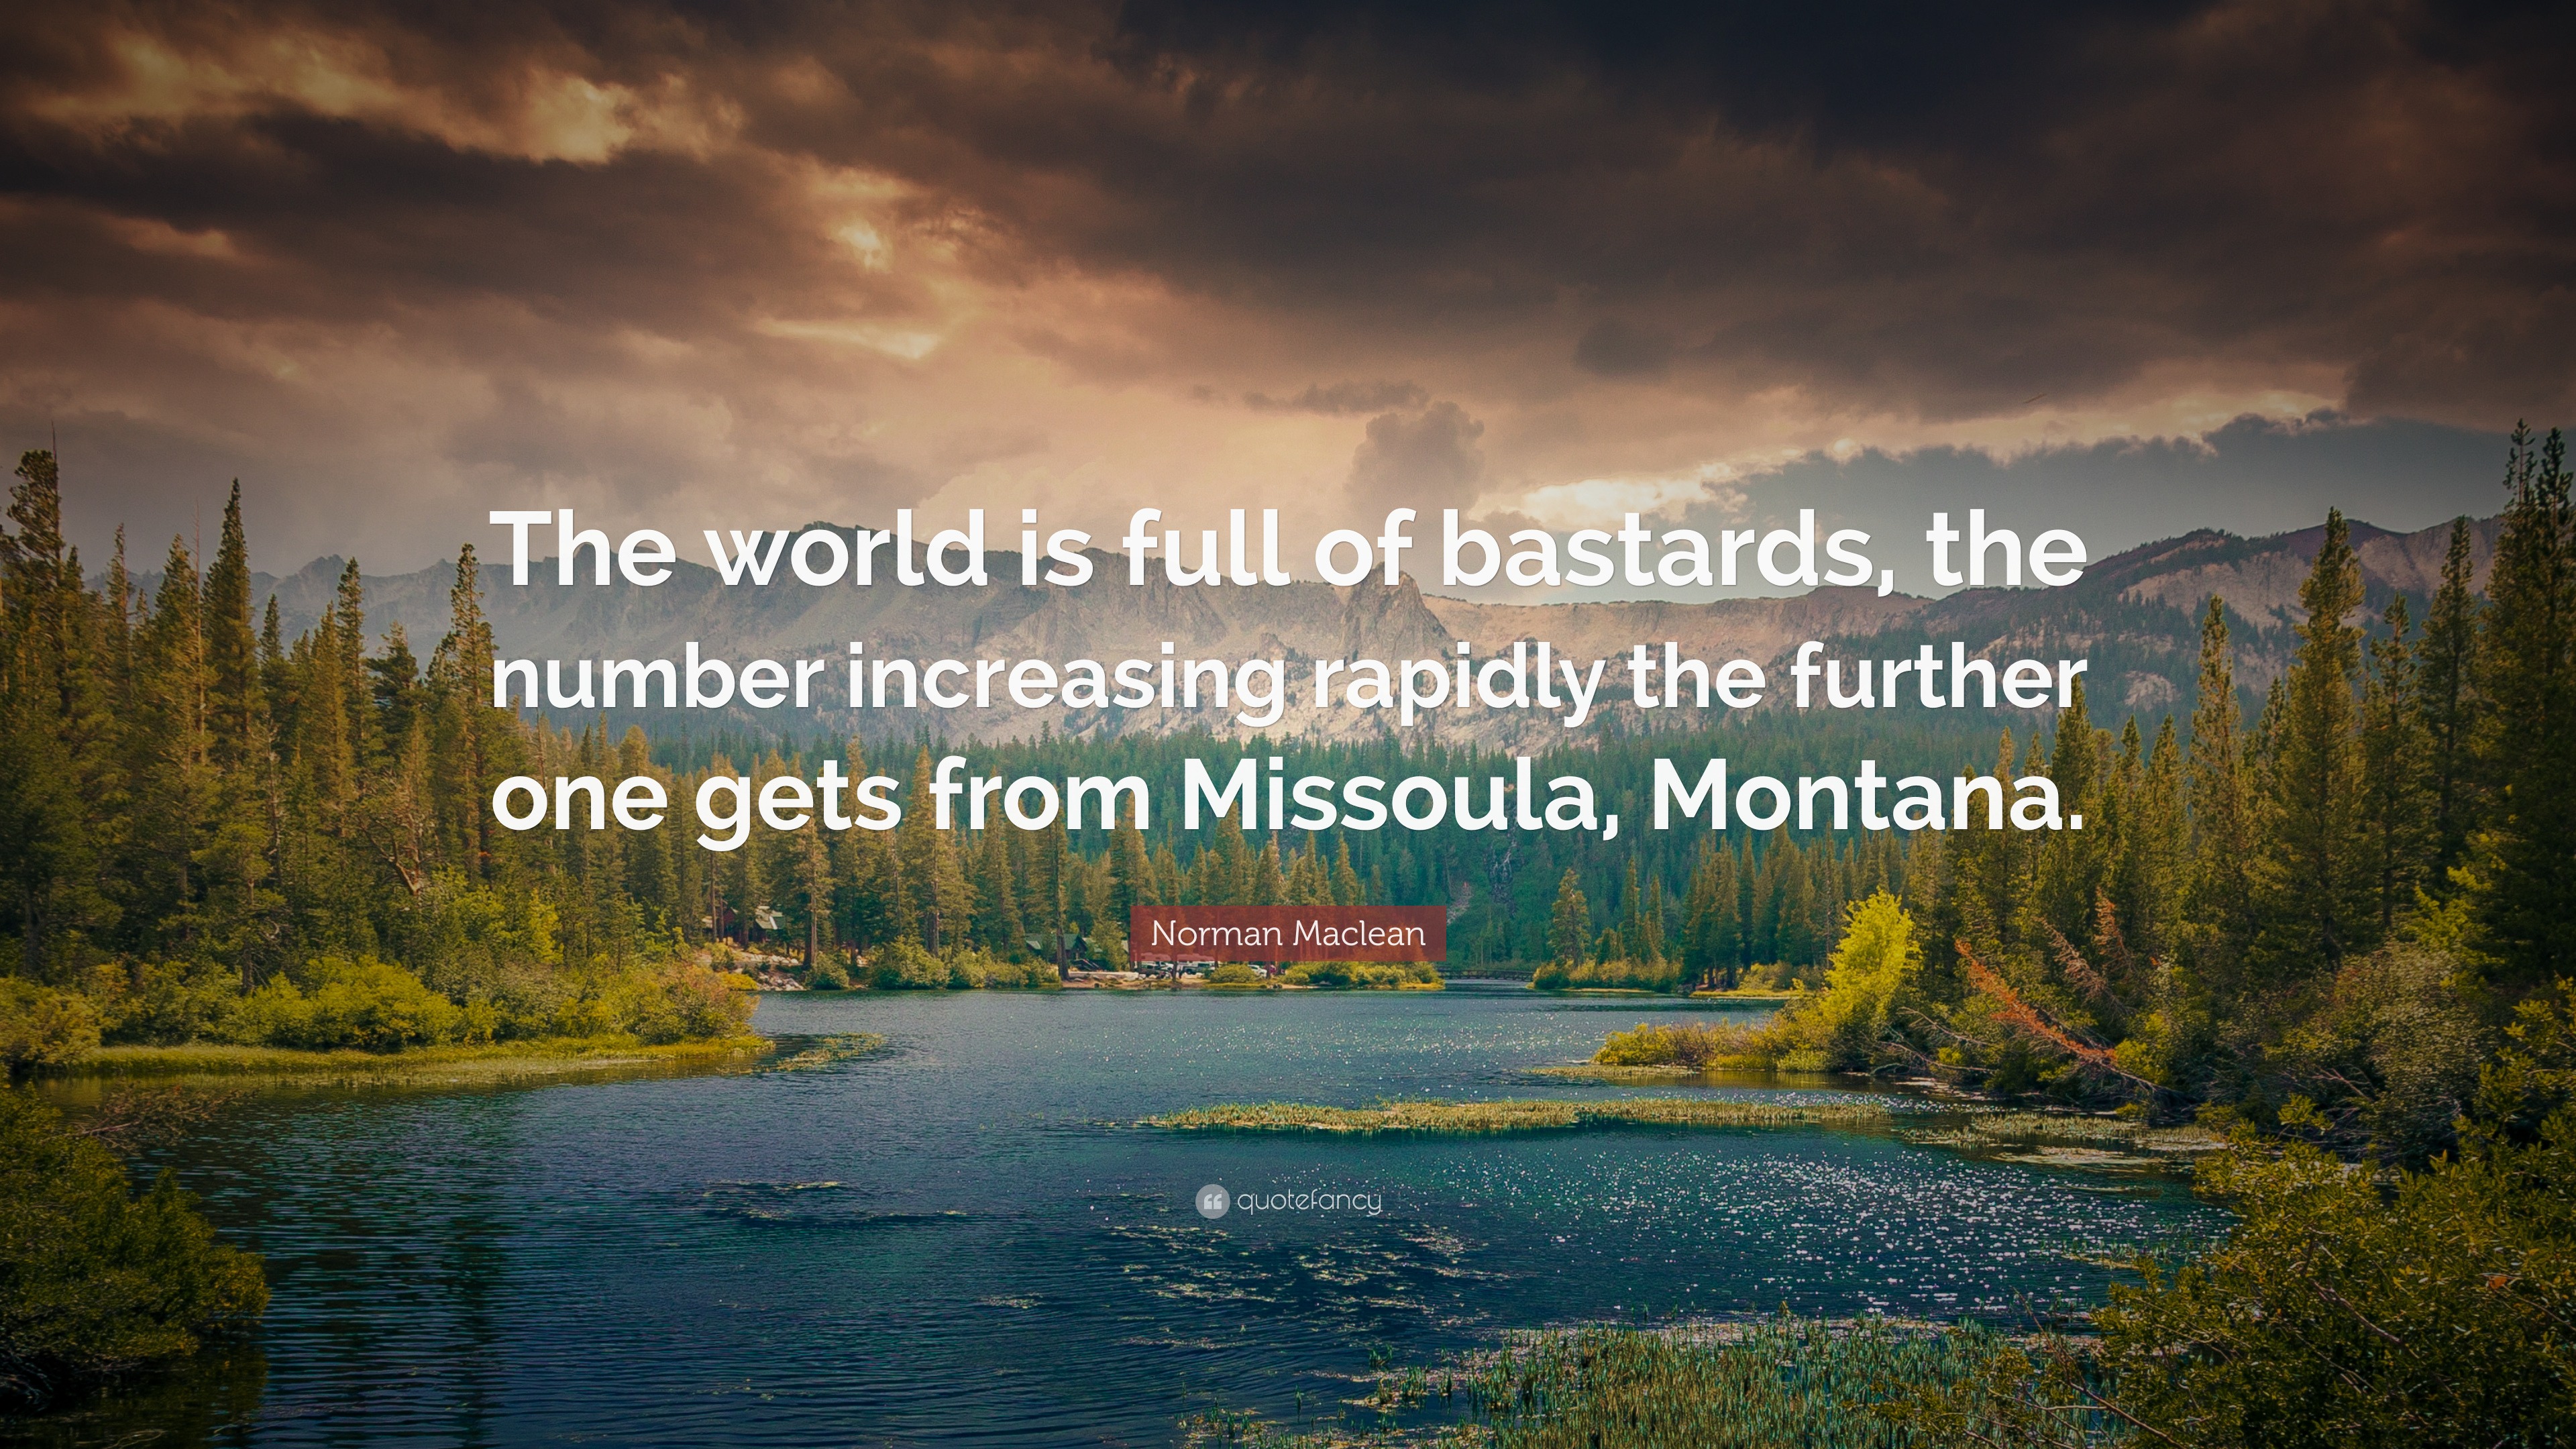 2532784-Norman-Maclean-Quote-The-world-is-full-of-bastards-the-number.jpg